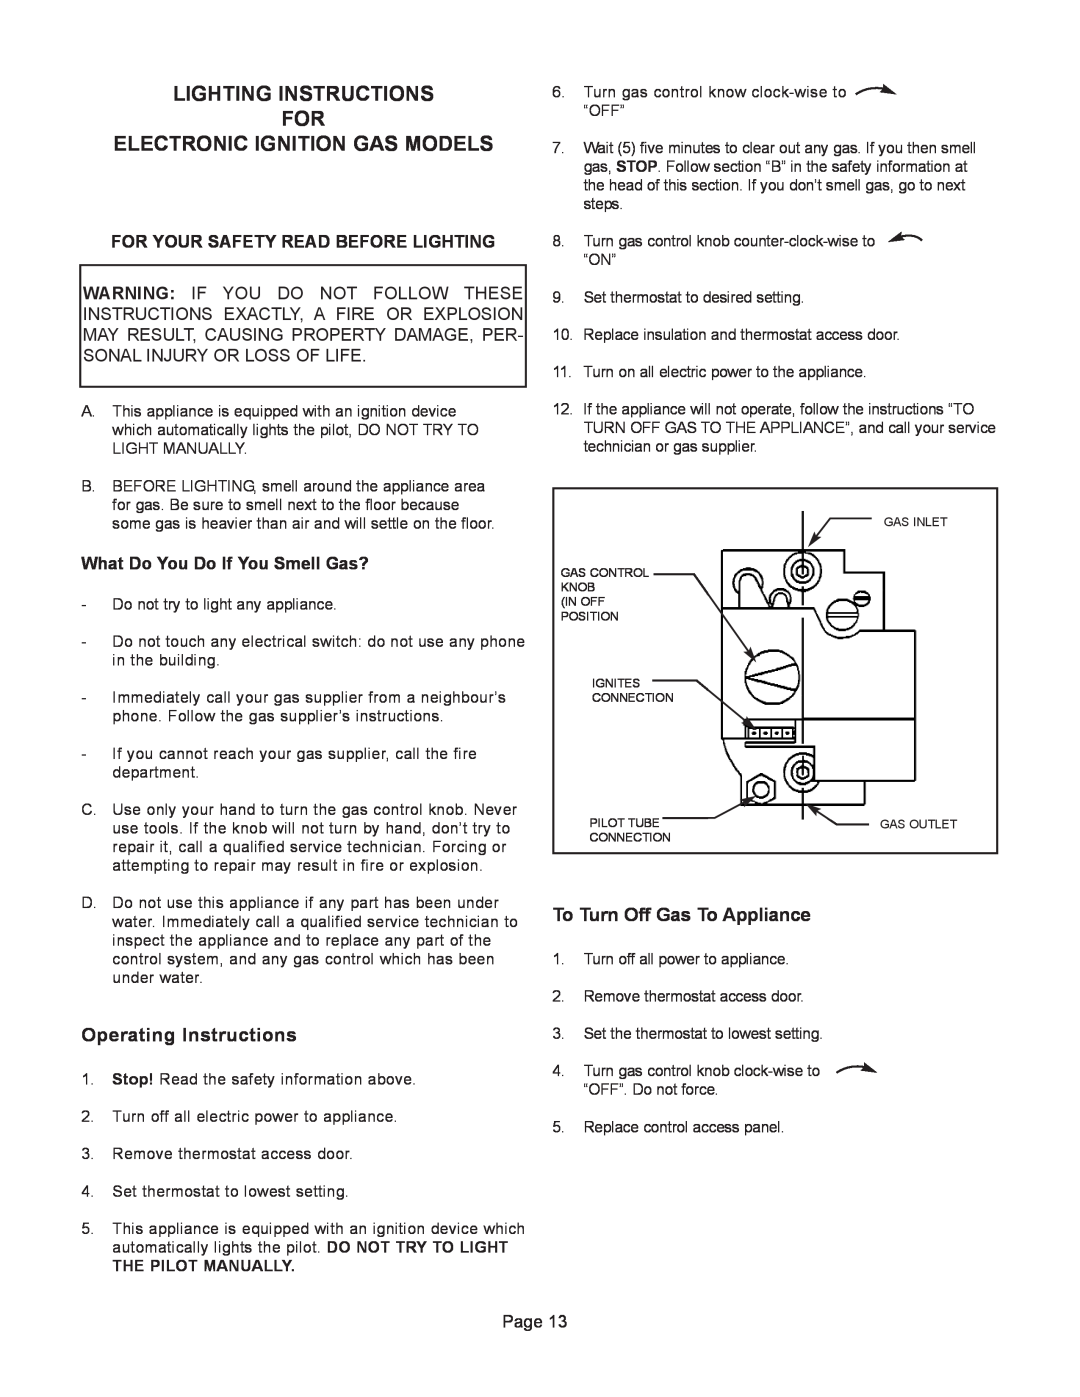 GSW G65 instruction manual Lighting Instructions For, Electronic Ignition Gas Models, For Your Safety Read Before Lighting 